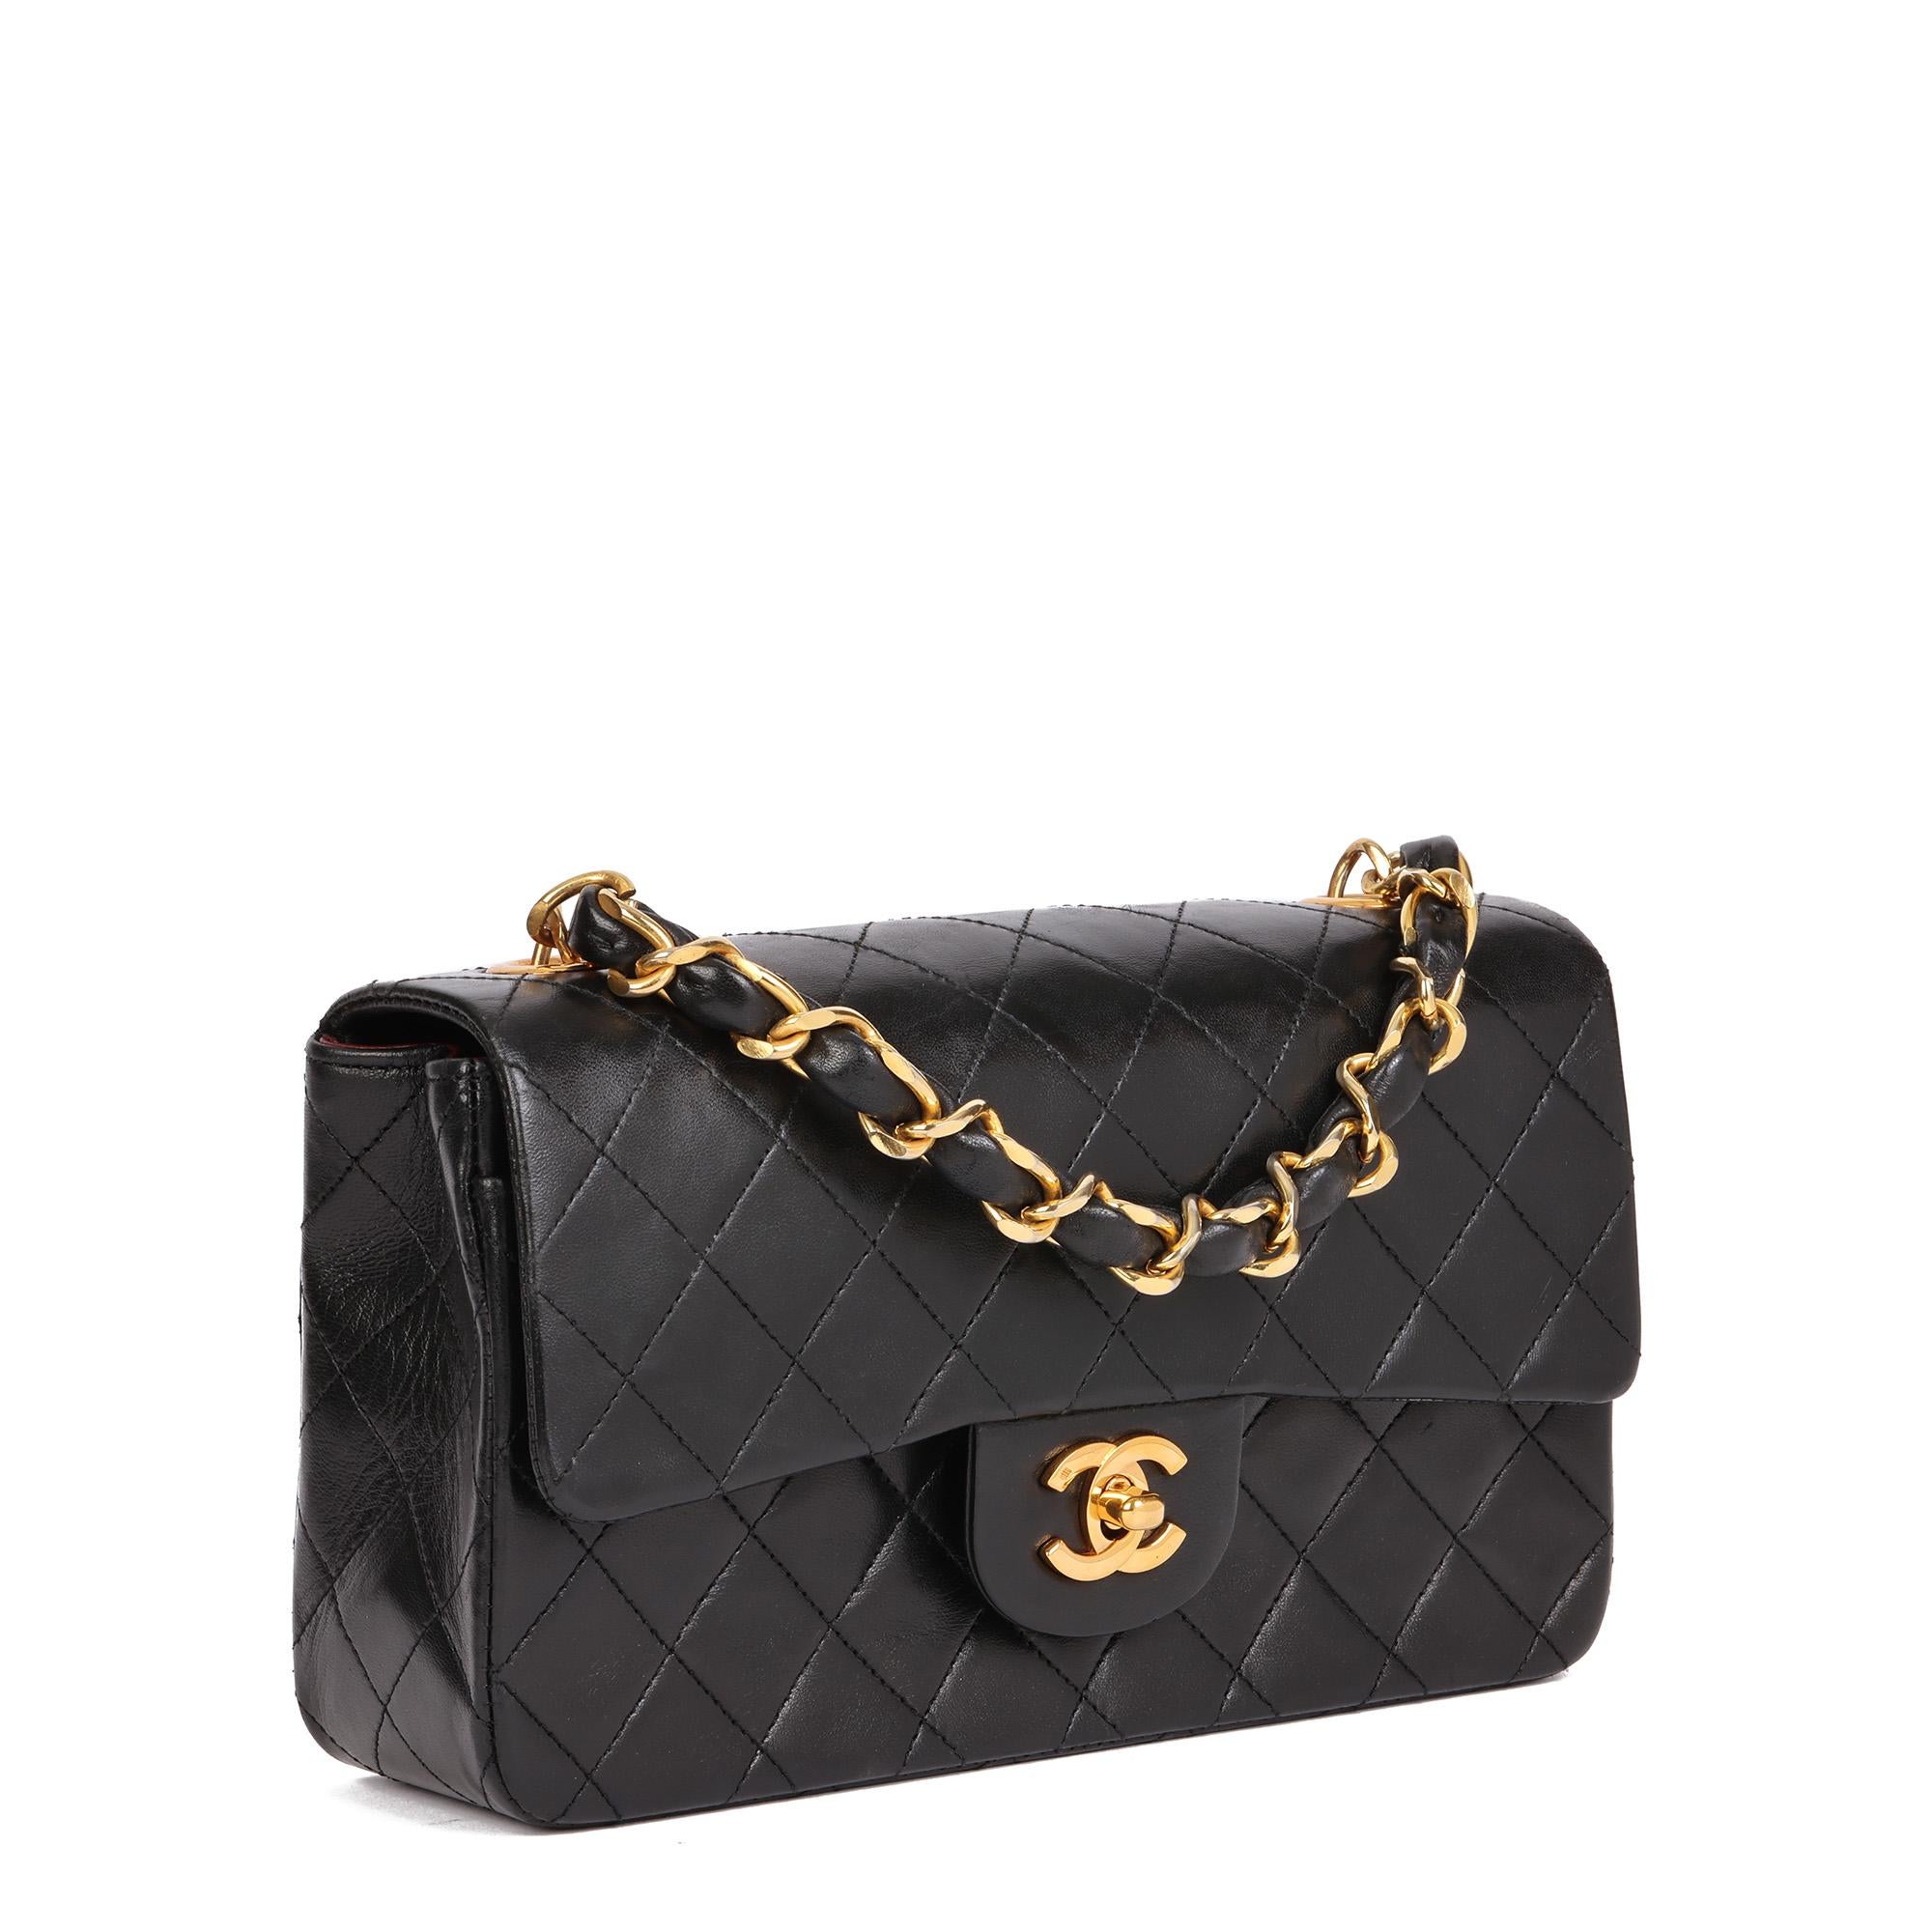 CHANEL
Black Quilted Lambskin Vintage Small Top Handle Classic Single Flap Bag

Serial Number: 1054904
Age (Circa): 1990
Accompanied By: Chanel Dust Bag
Authenticity Details: Serial Sticker (Made in France)
Gender: Ladies
Type: Top Handle

Colour: